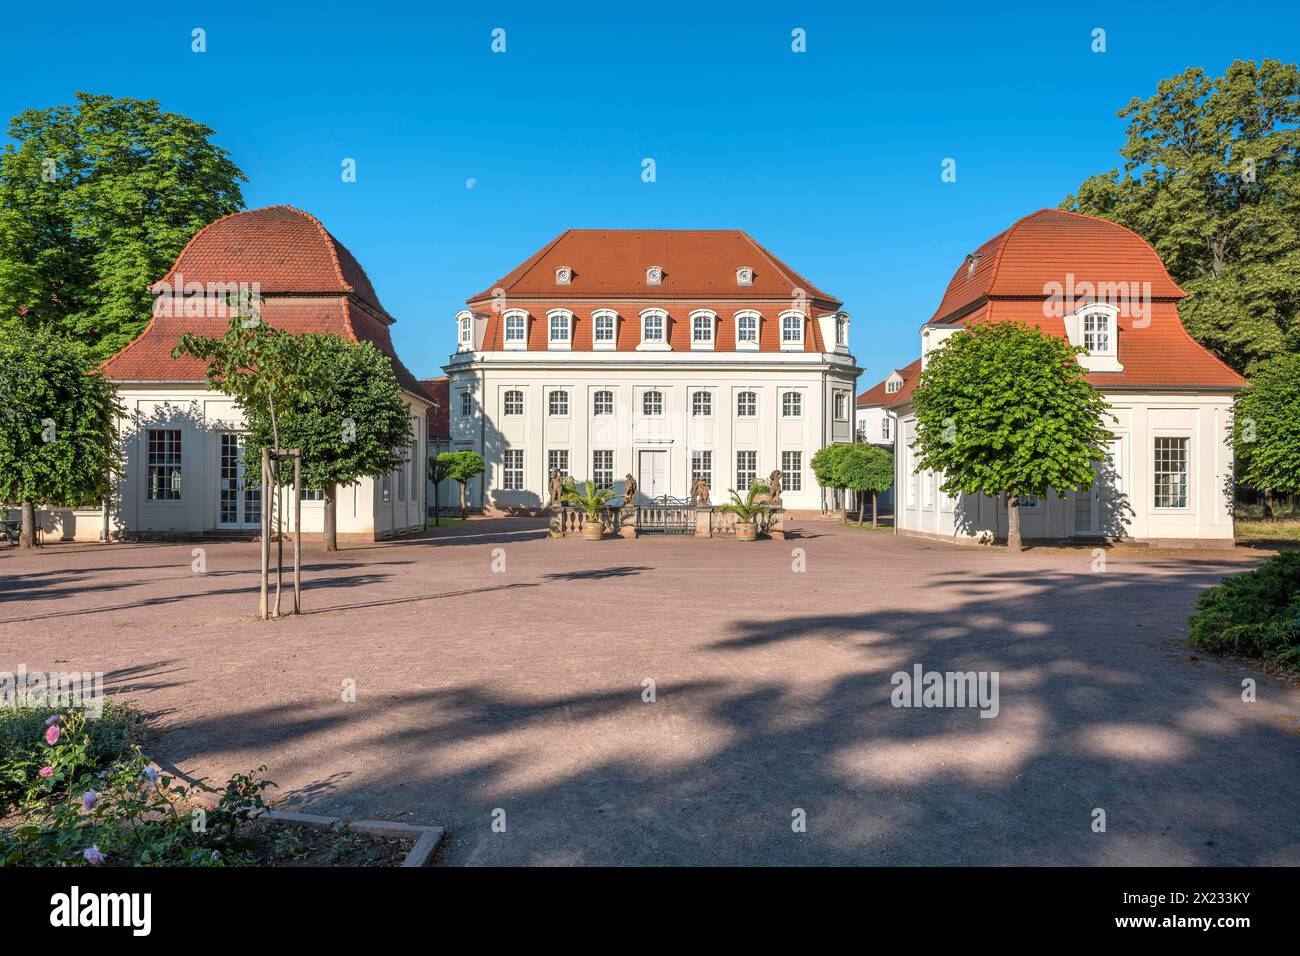 Historic spa facilities, Goethe town of Bad Lauchstaedt, Saxony-Anhalt, Germany Stock Photo